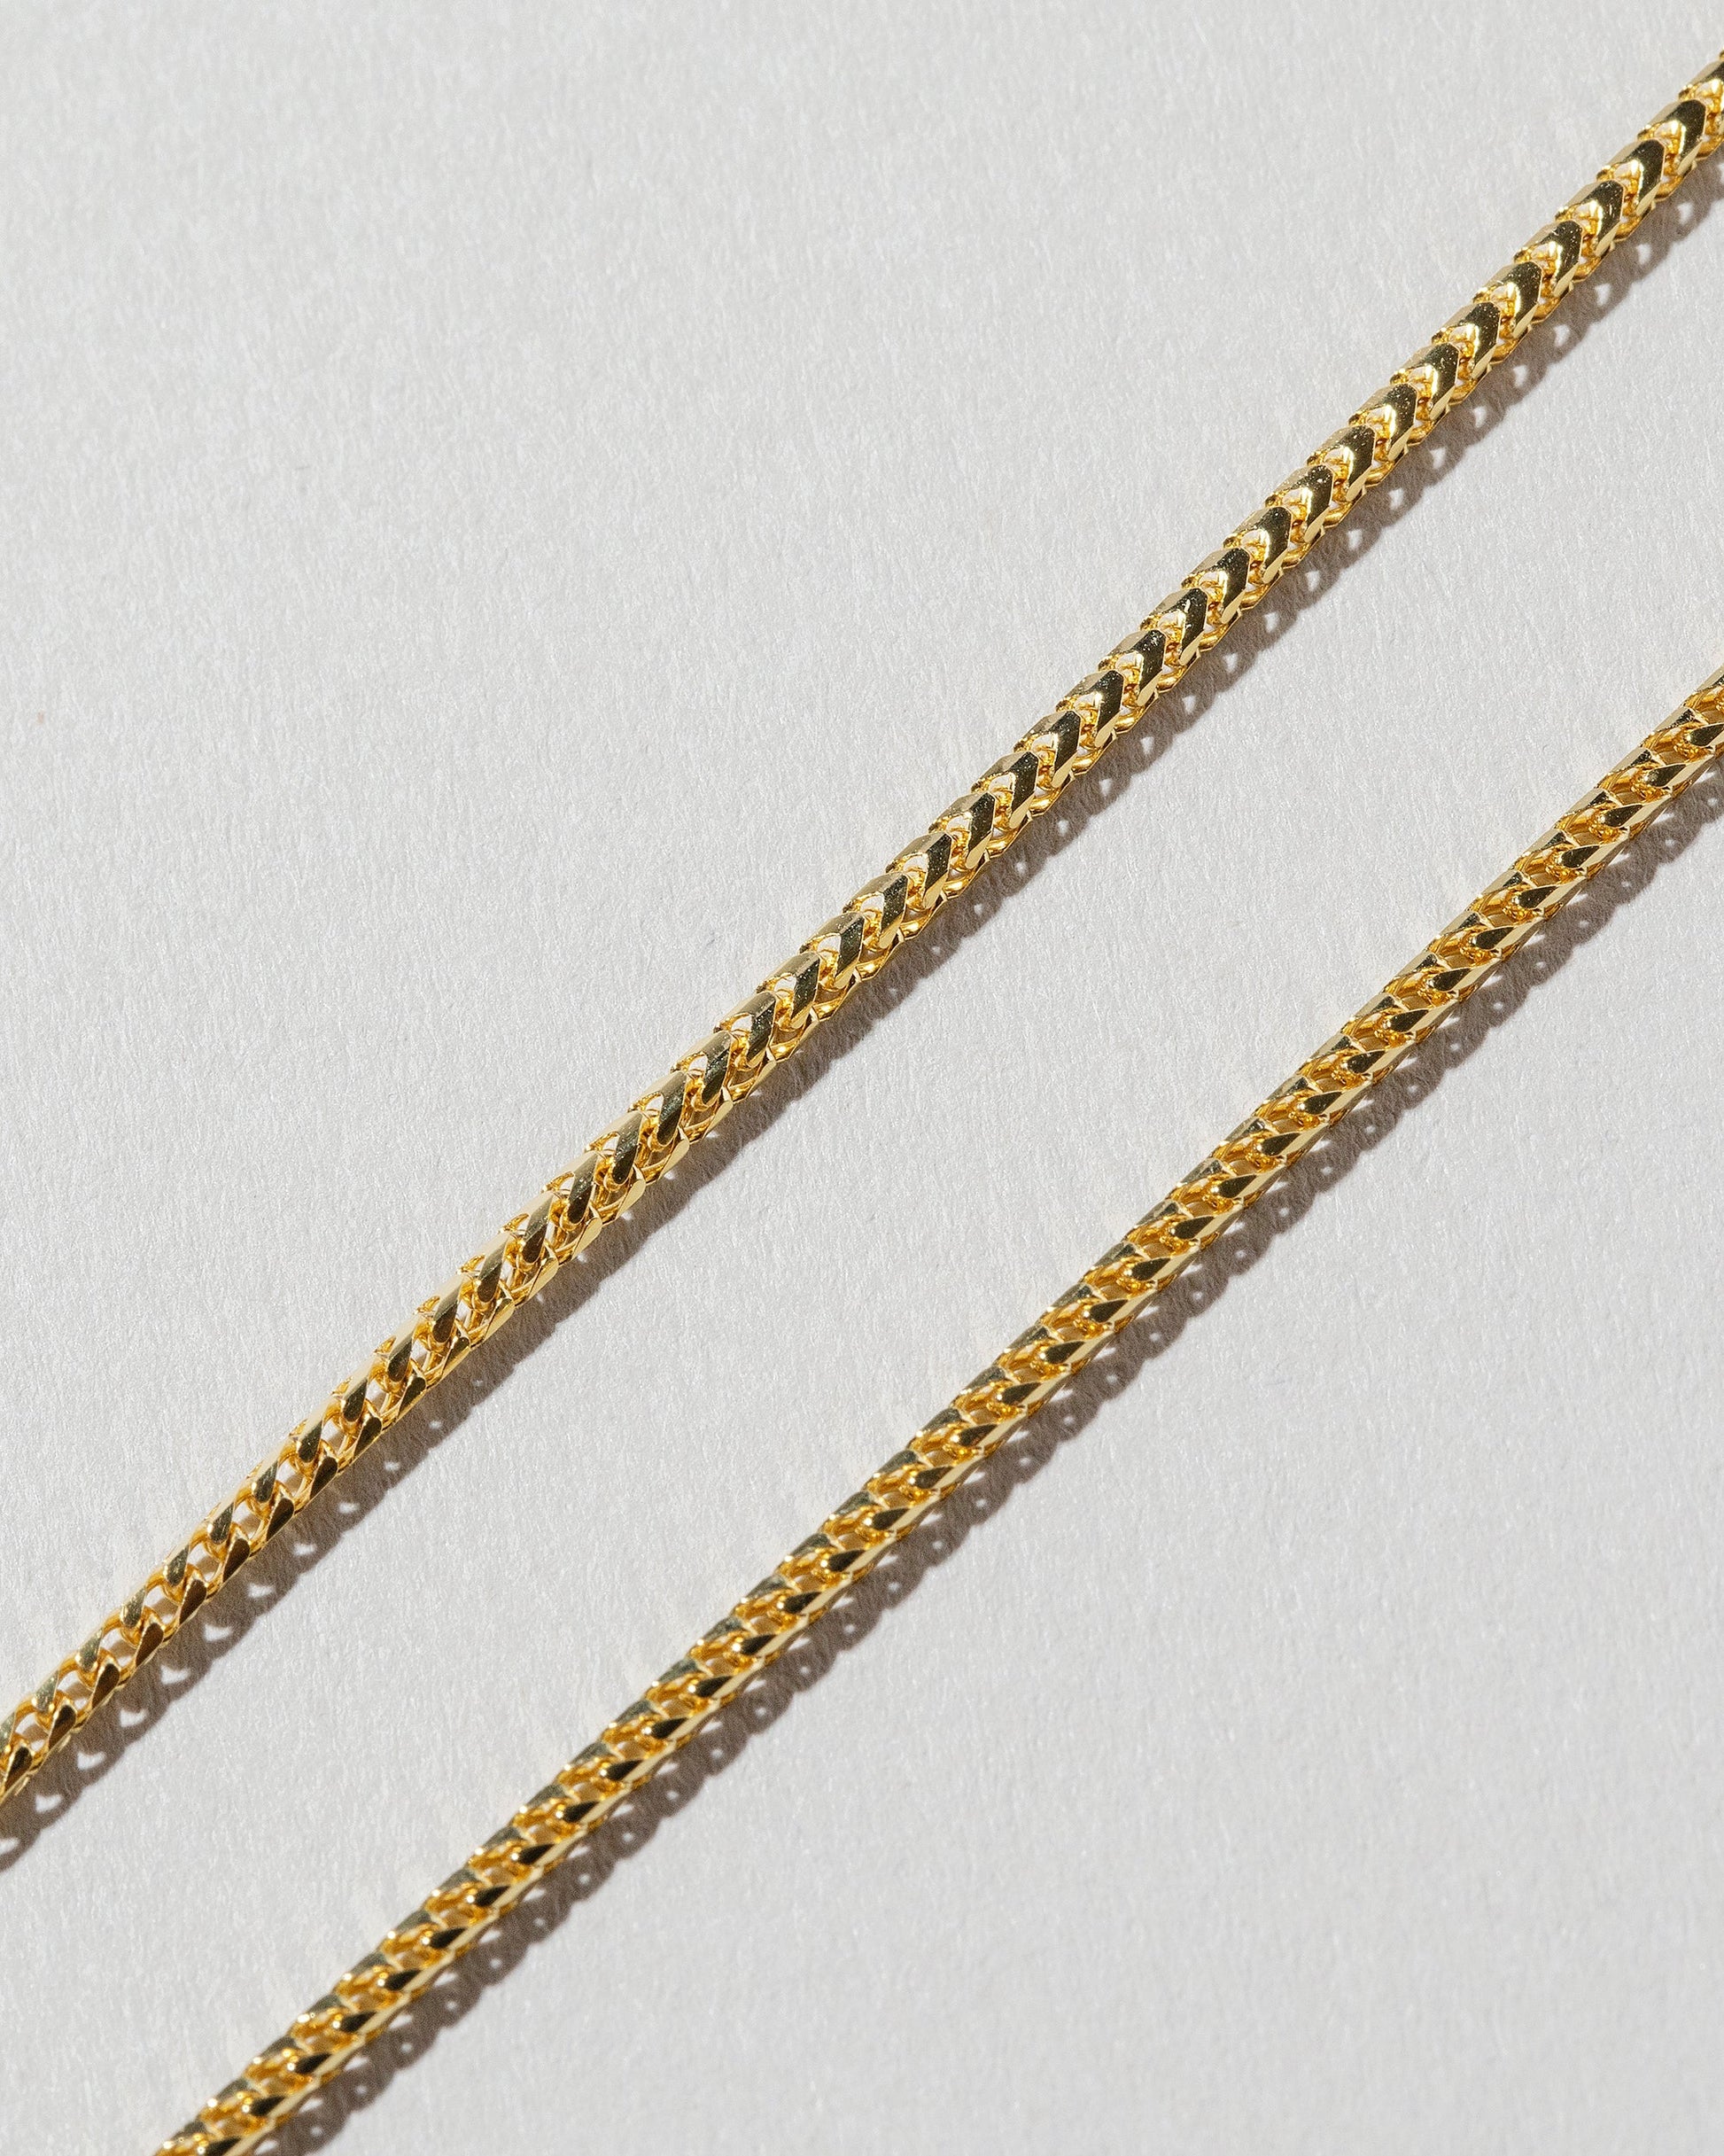 Closeup view of the Gold 18" 1.5mm Ritual Chain Necklace on light color background.